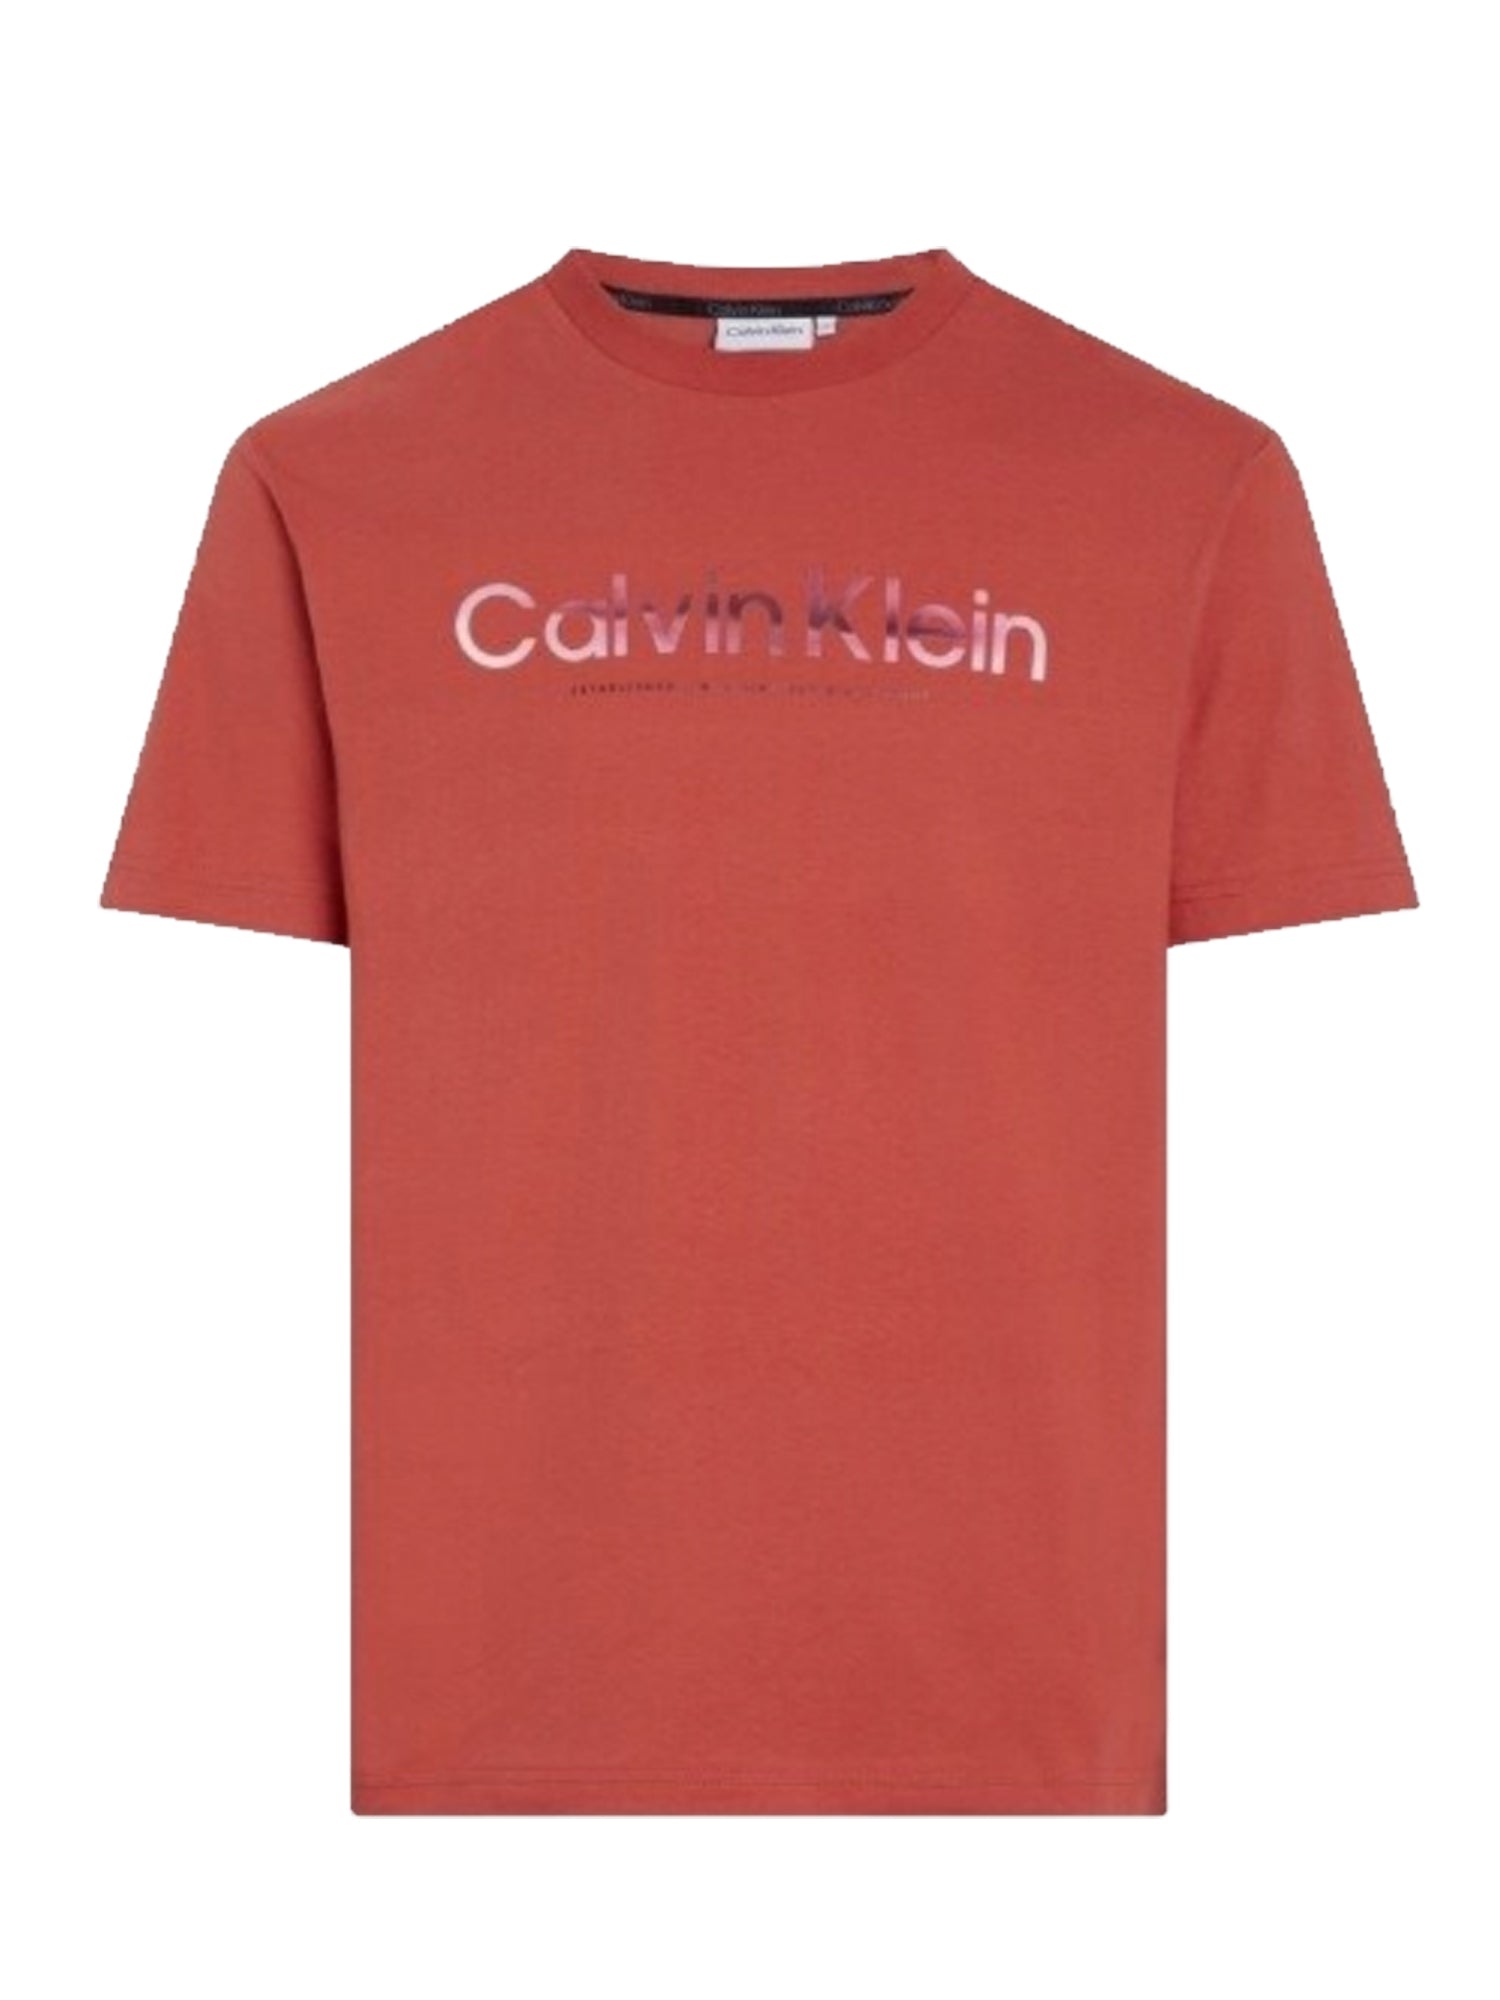 CALVIN KLEIN T-SHIRT DIFFUSED LOGO ROSSO